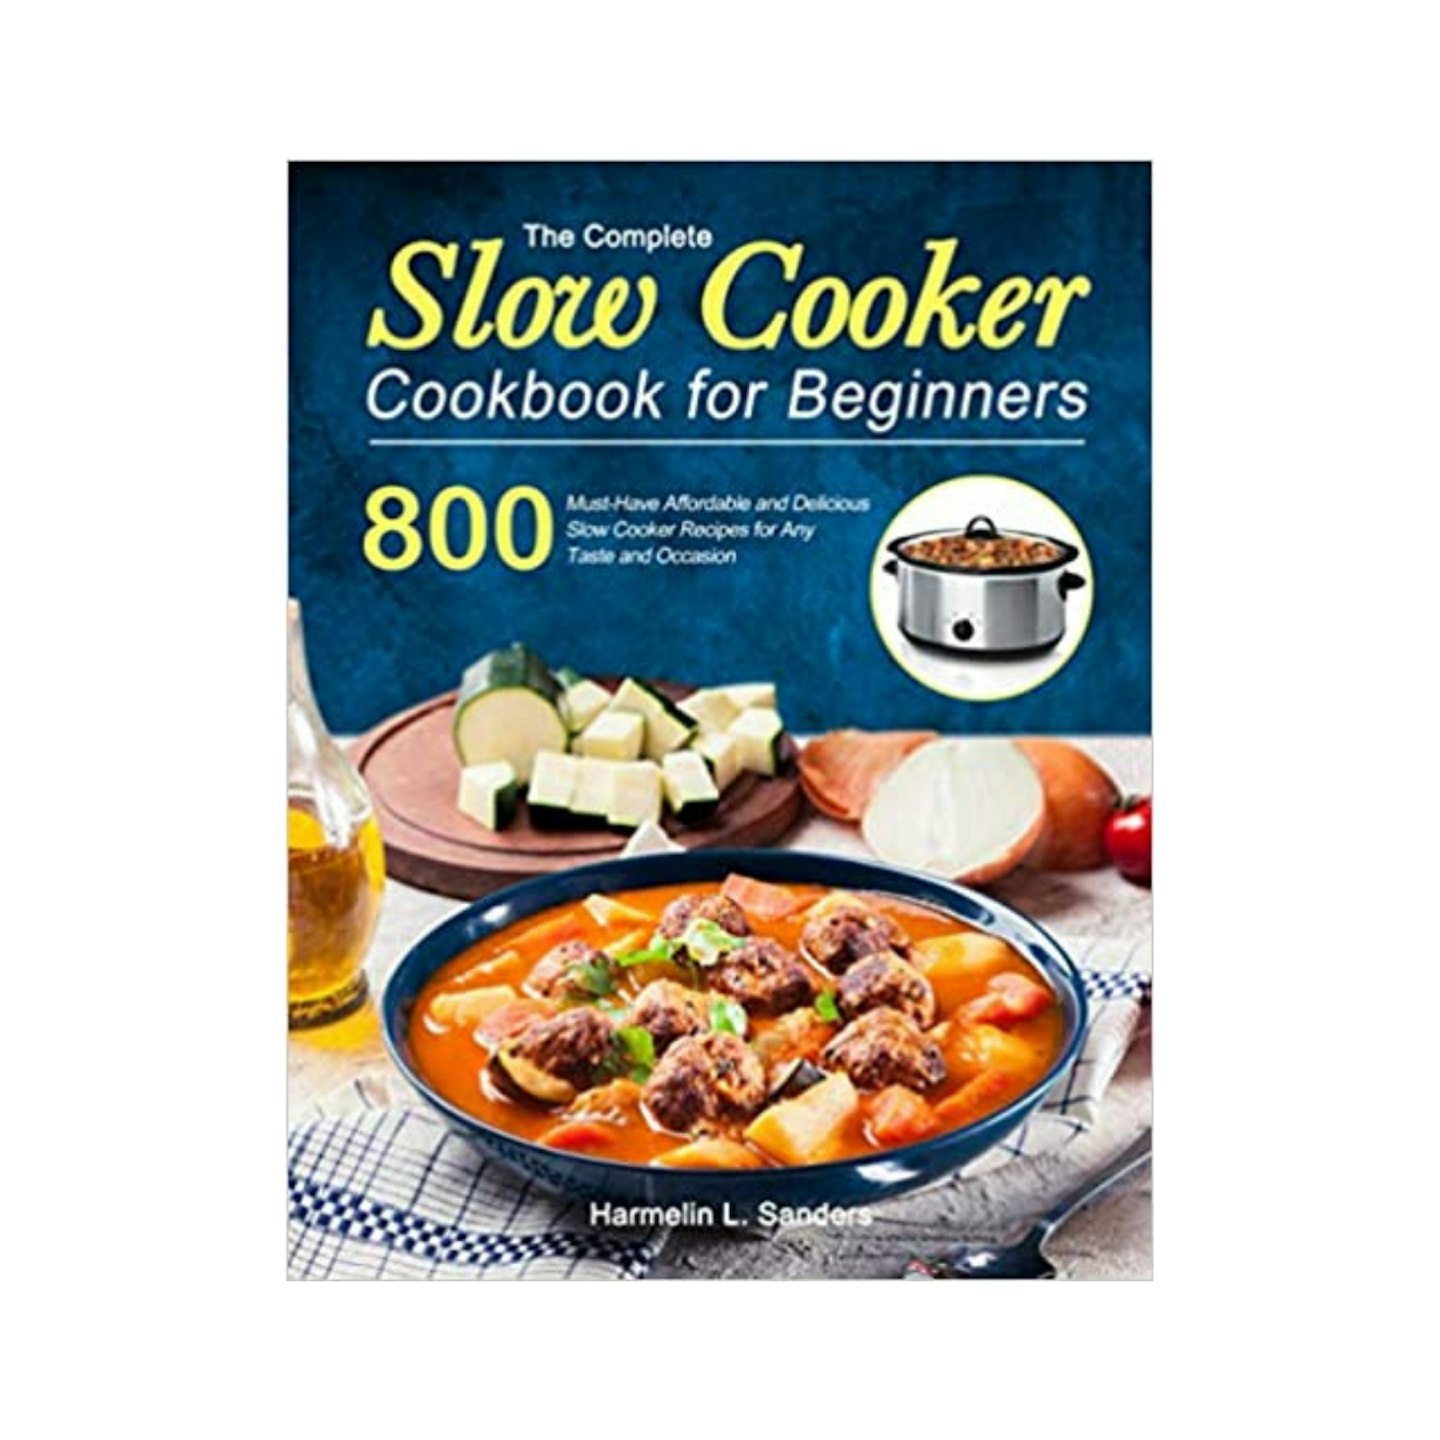 The Complete Slow Cooker Cookbook for Beginners